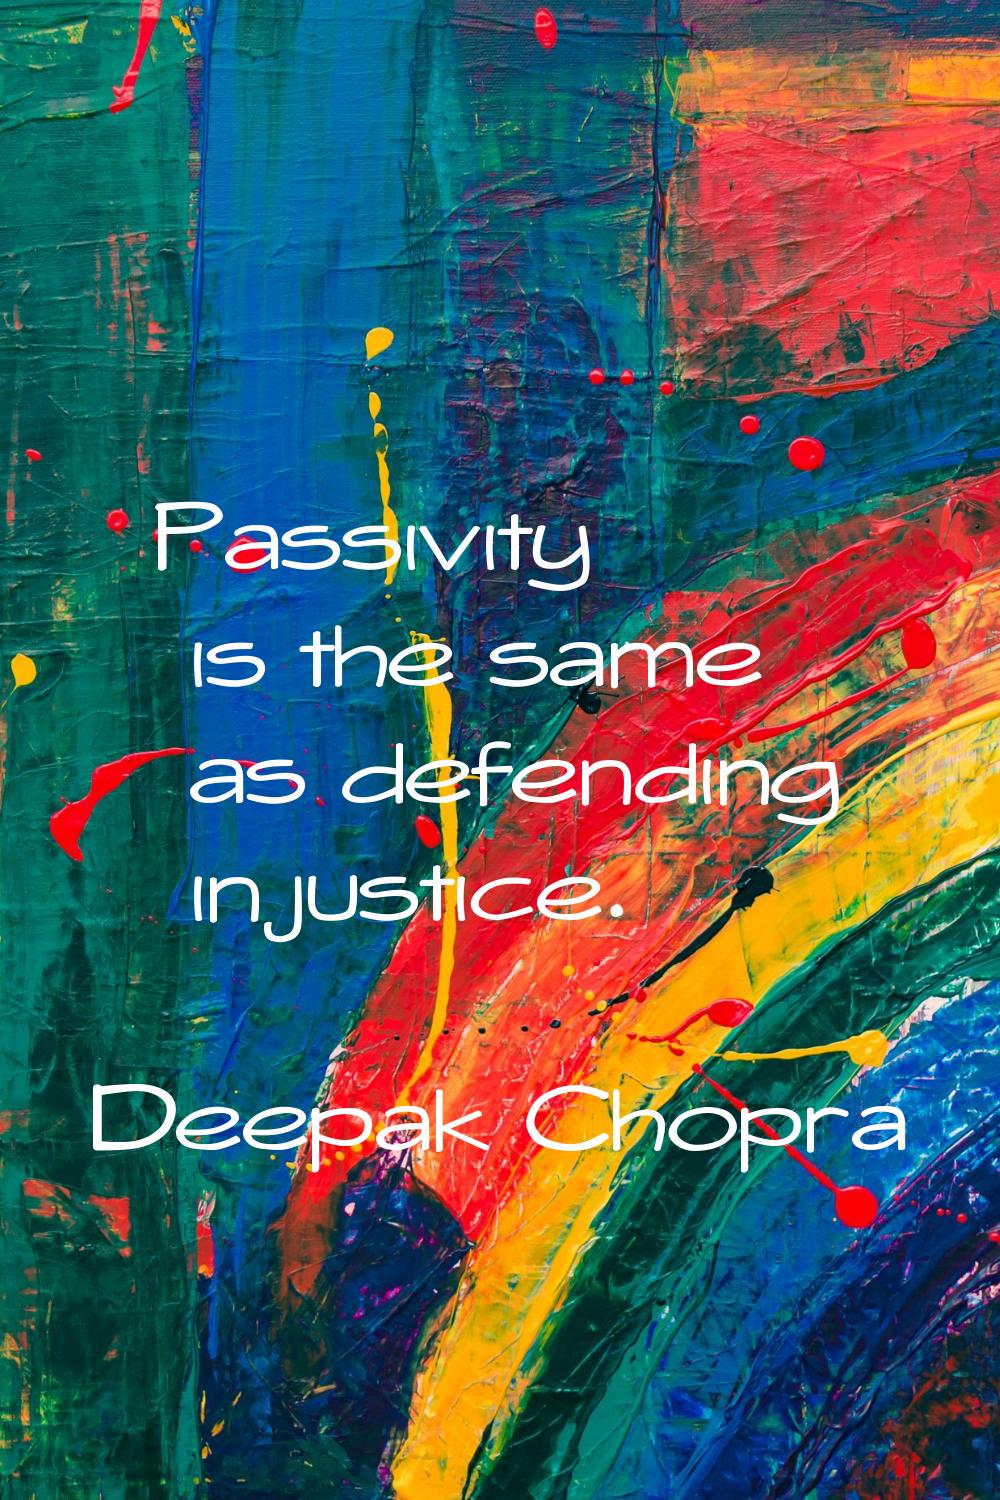 Passivity is the same as defending injustice.